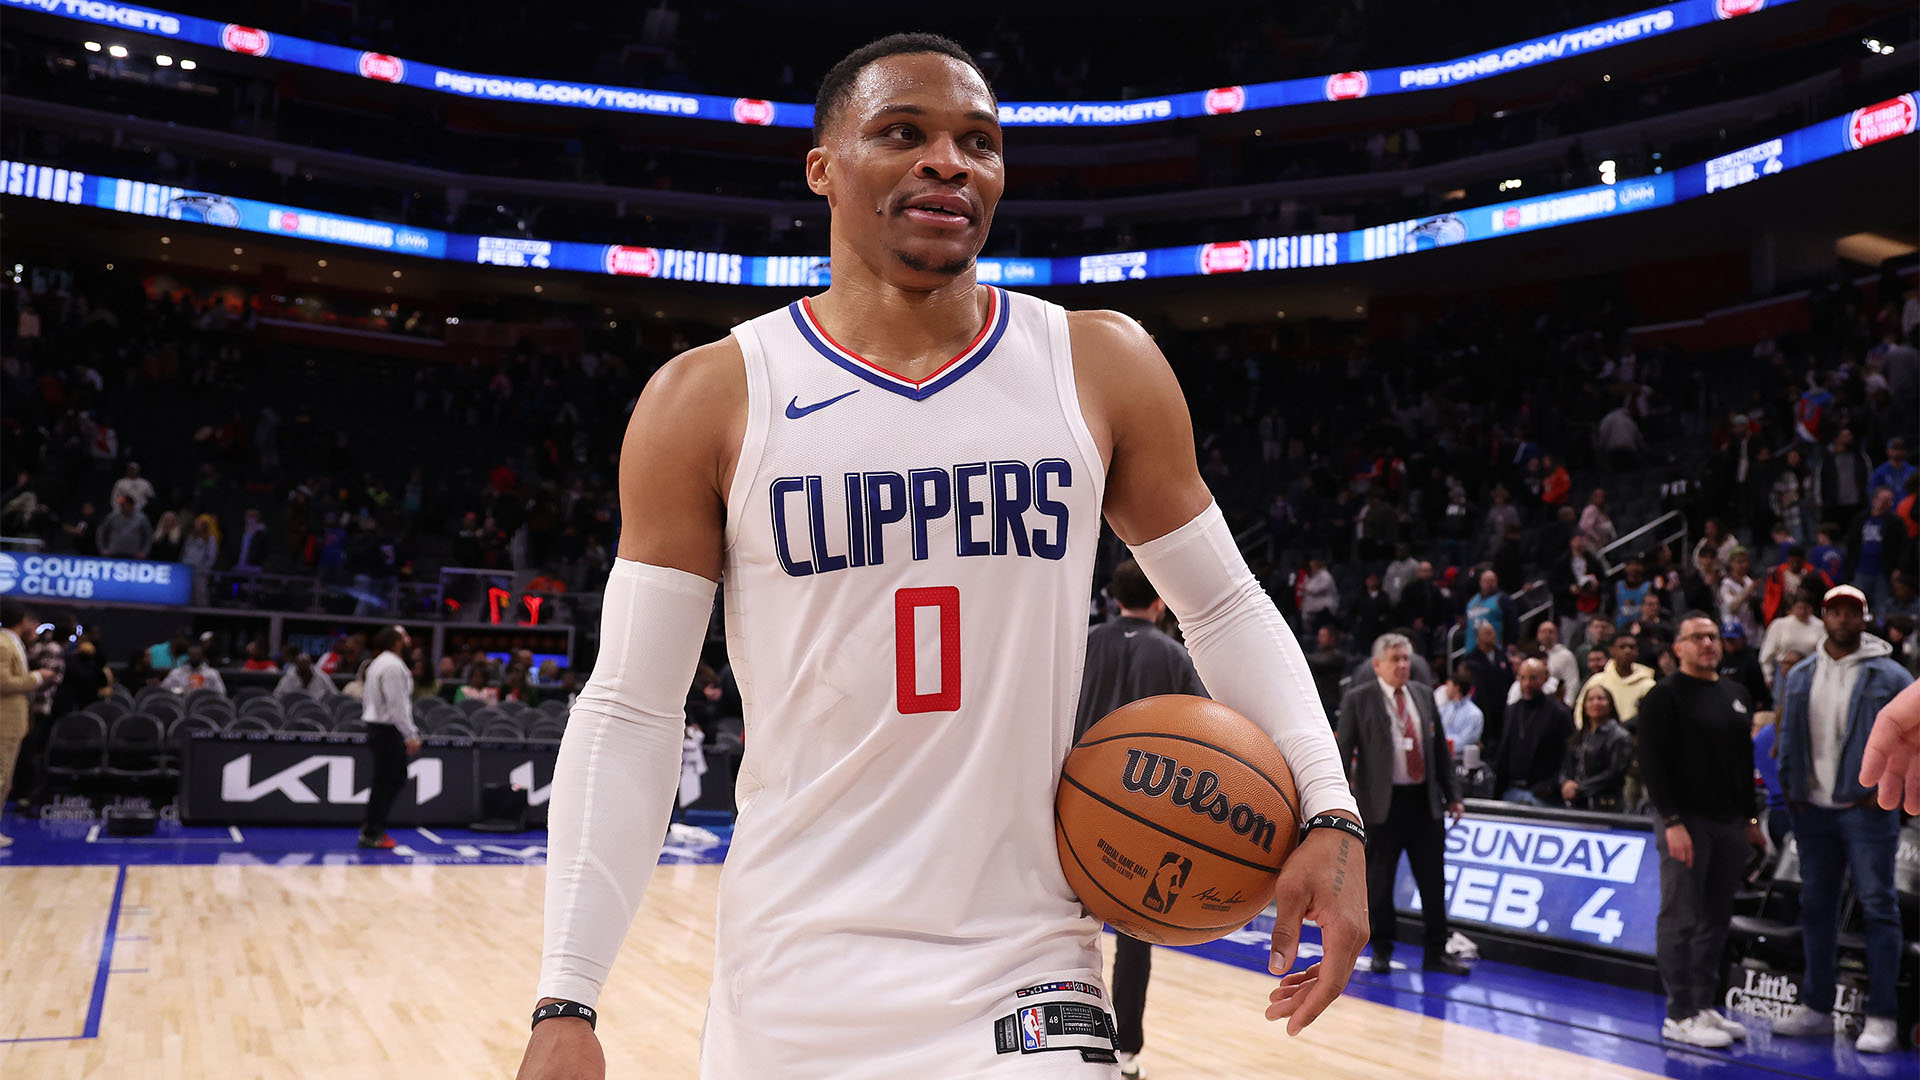 Russell Westbrook Joins Target In Building 180 Affordable Housing Units For Residents In His Hometown Of South Central LA